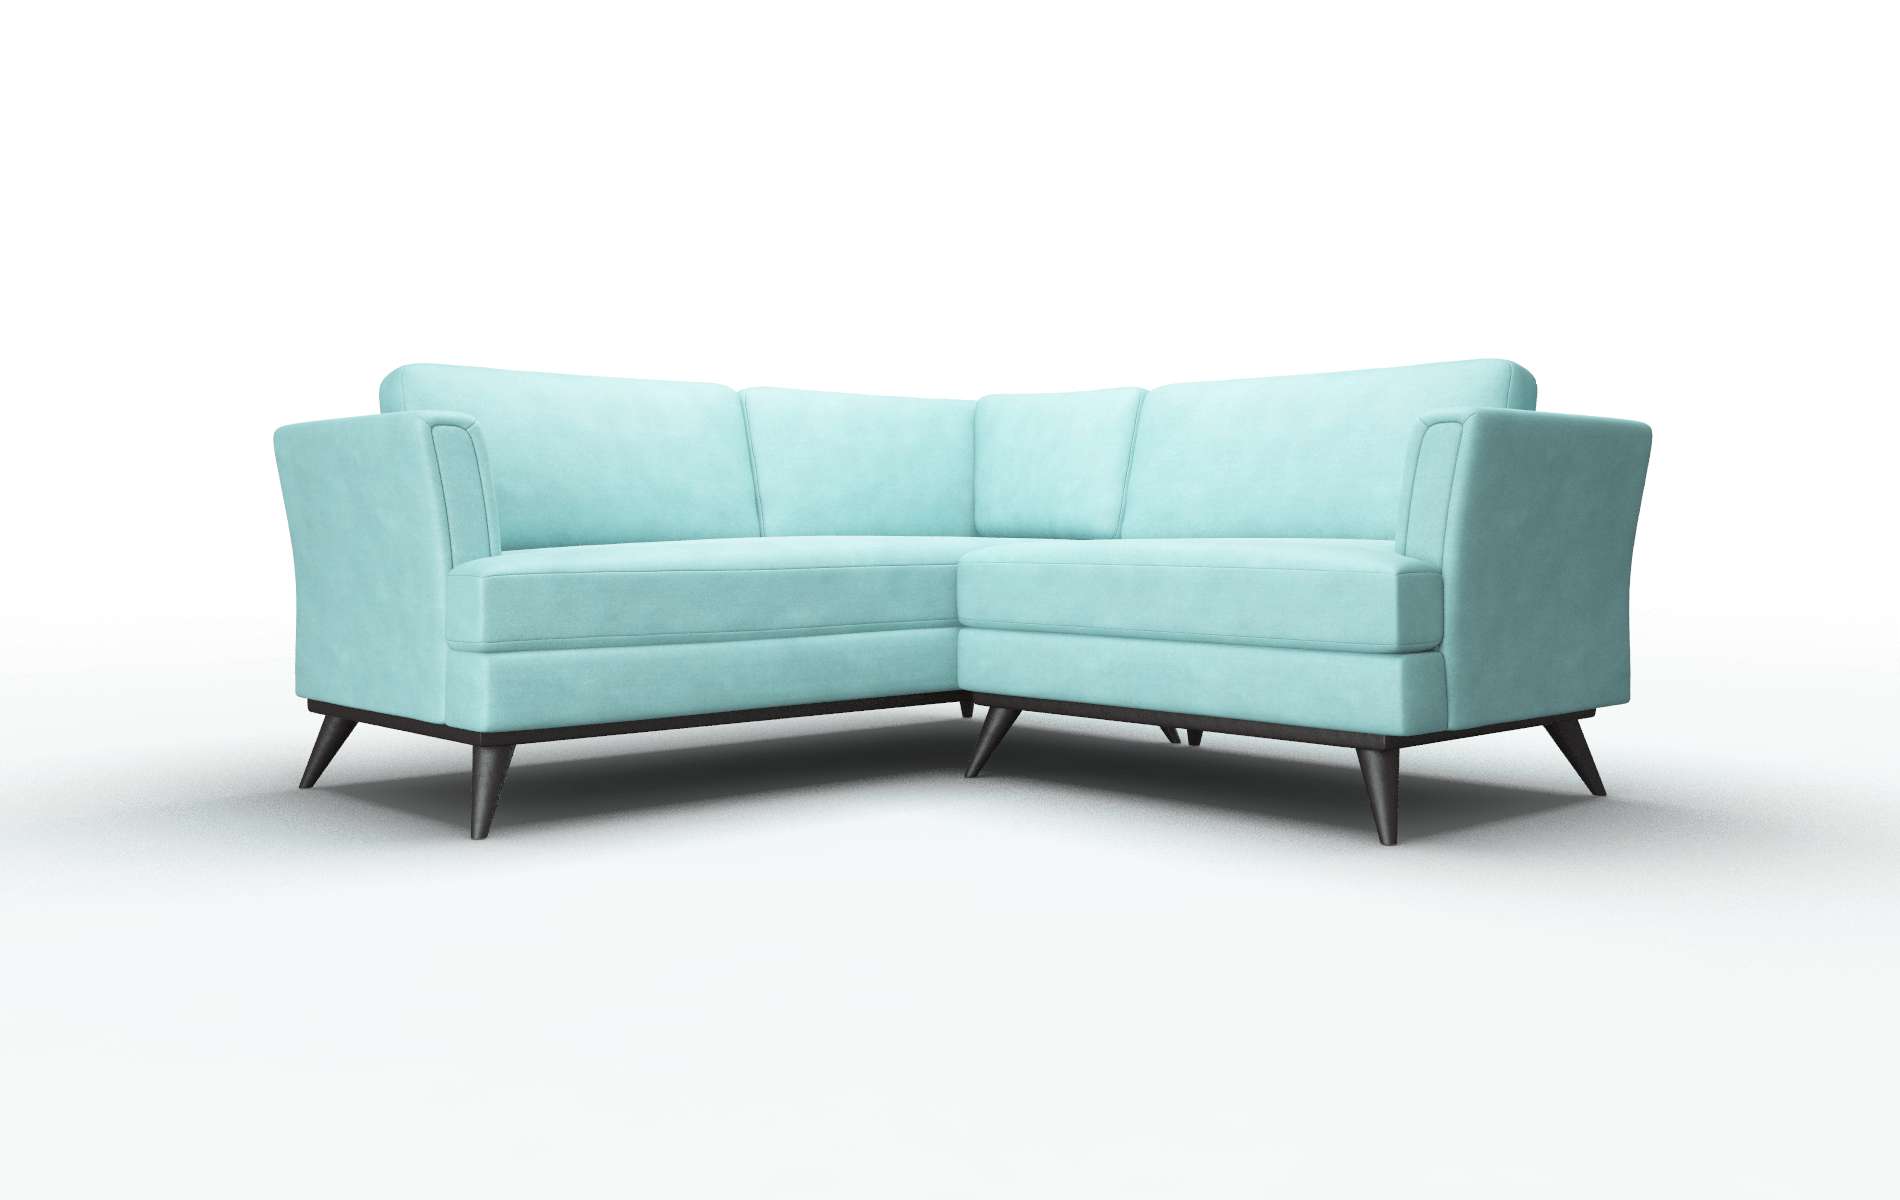 Antalya Curious Turquoise Sectional espresso legs